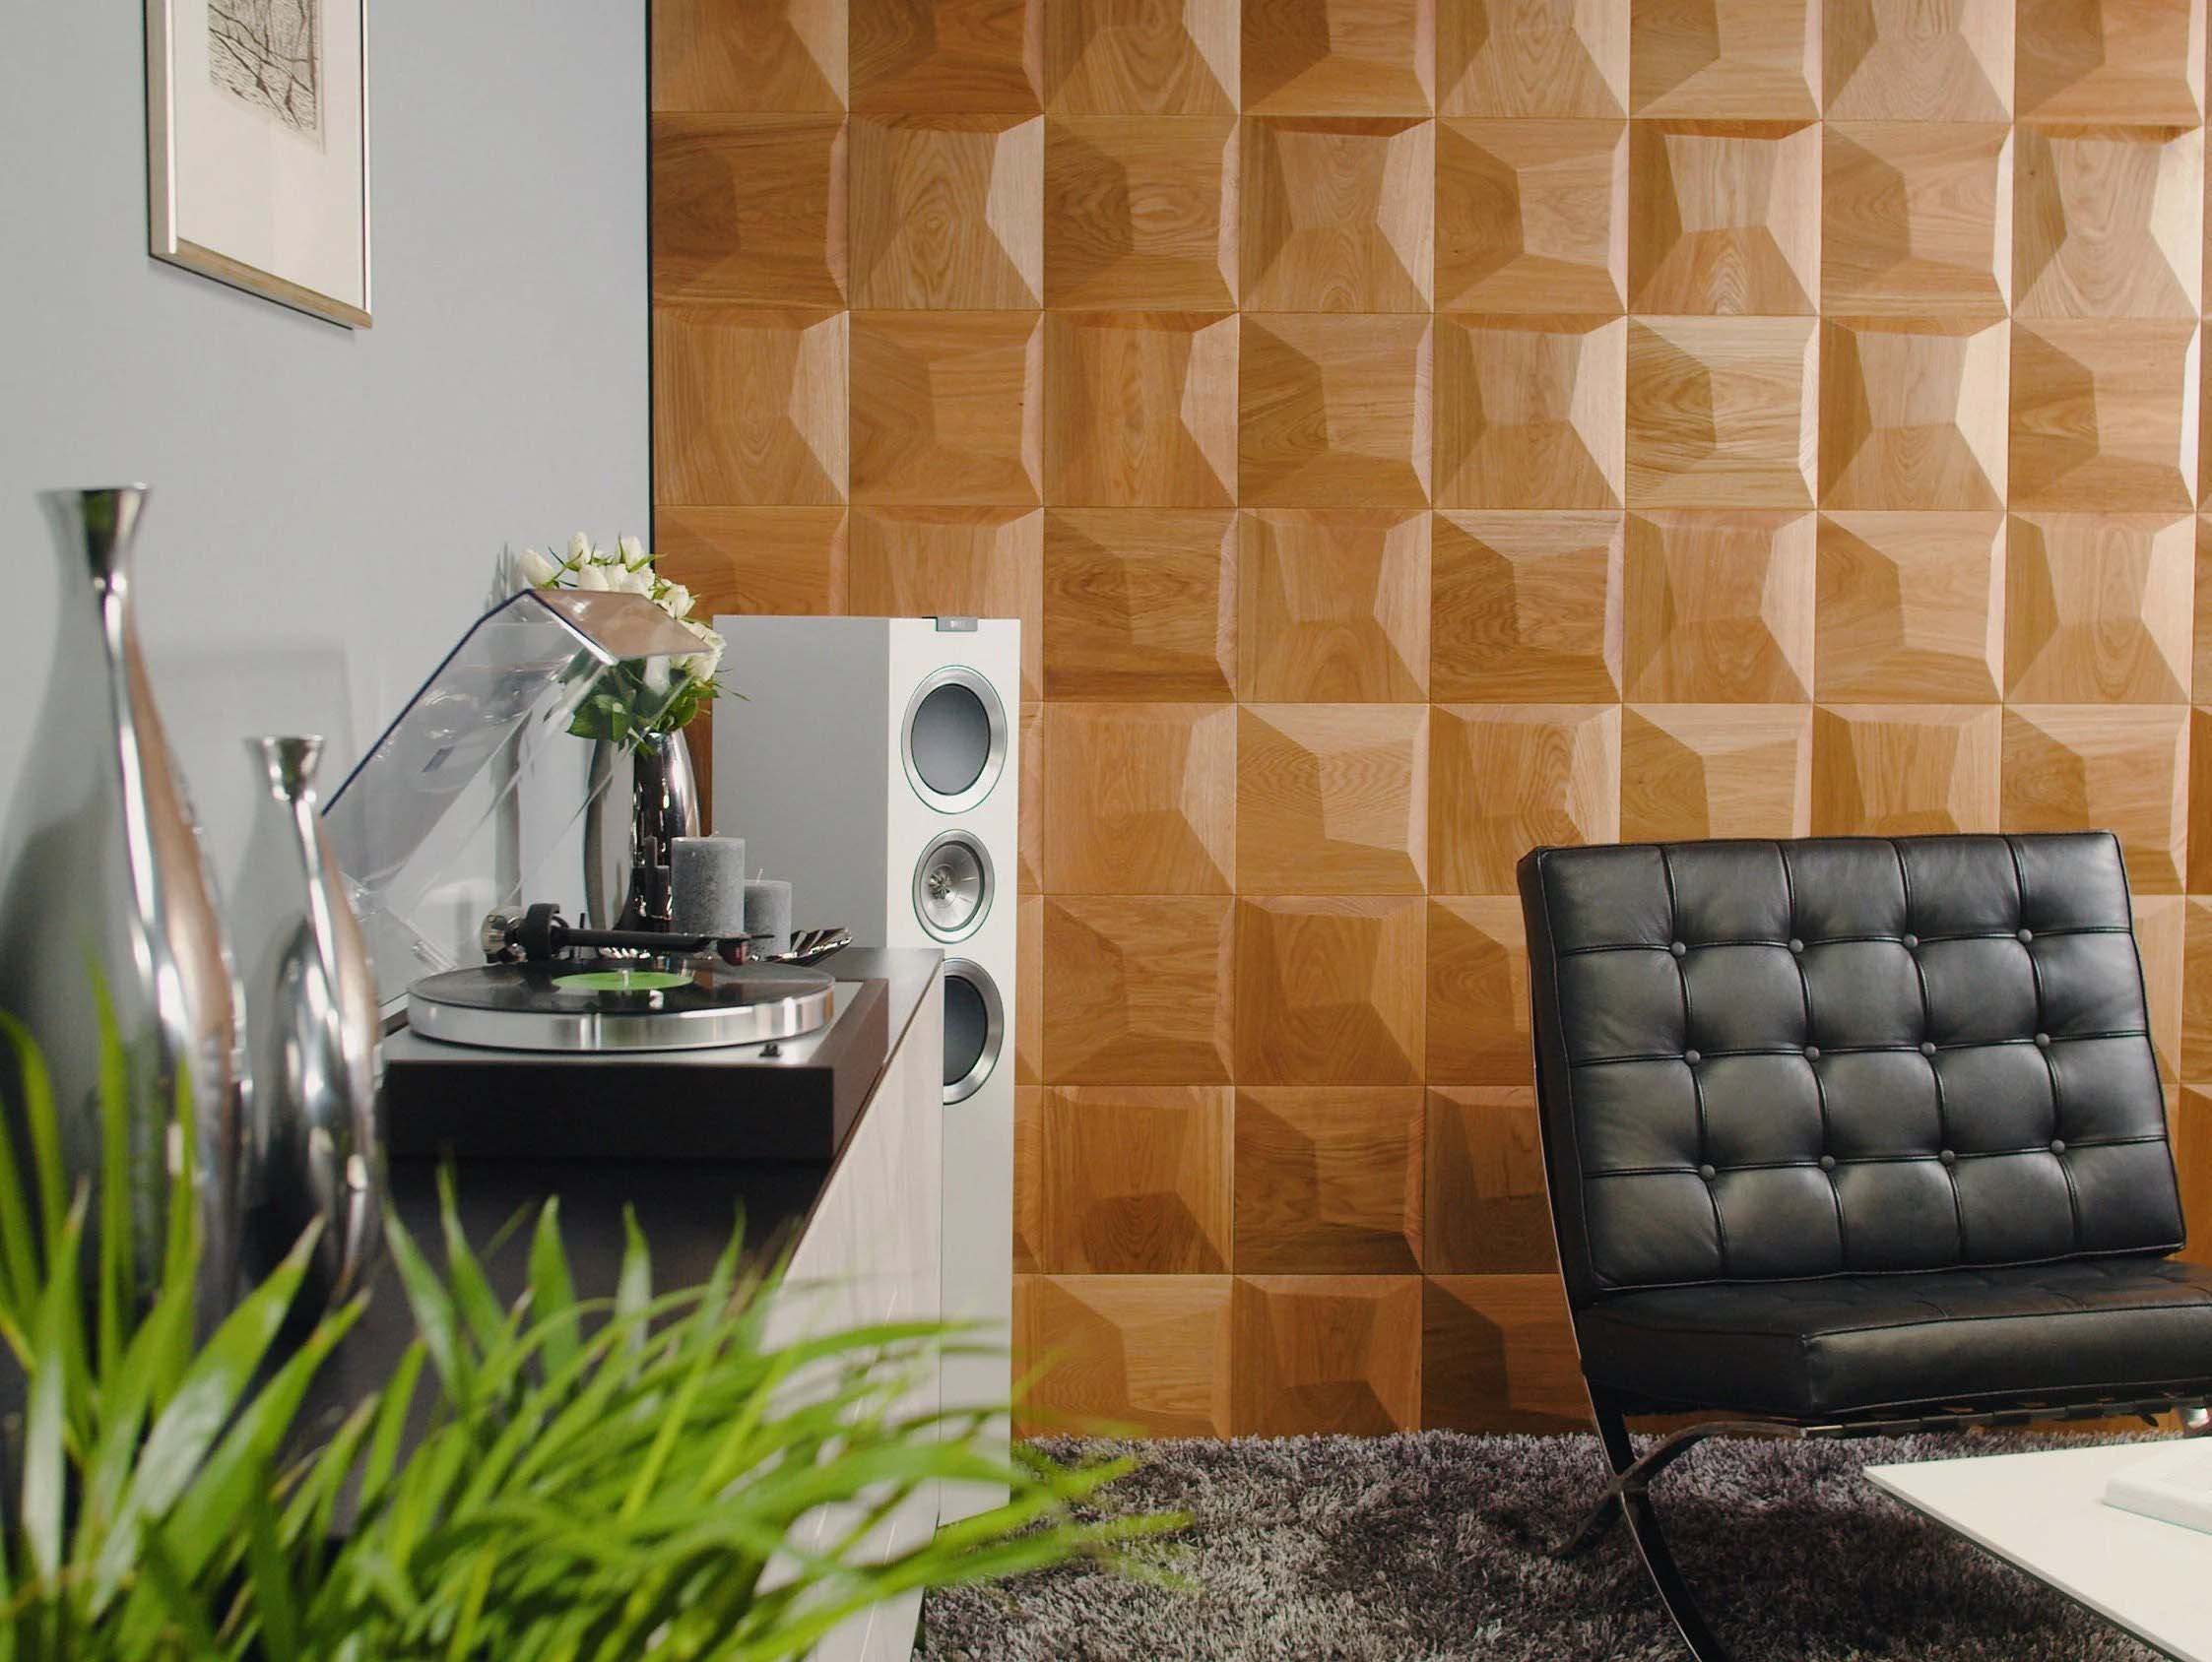 Wooden Walls by Al Nahj Al Hadeeth Company: Elevating Your Space with Natural Beauty